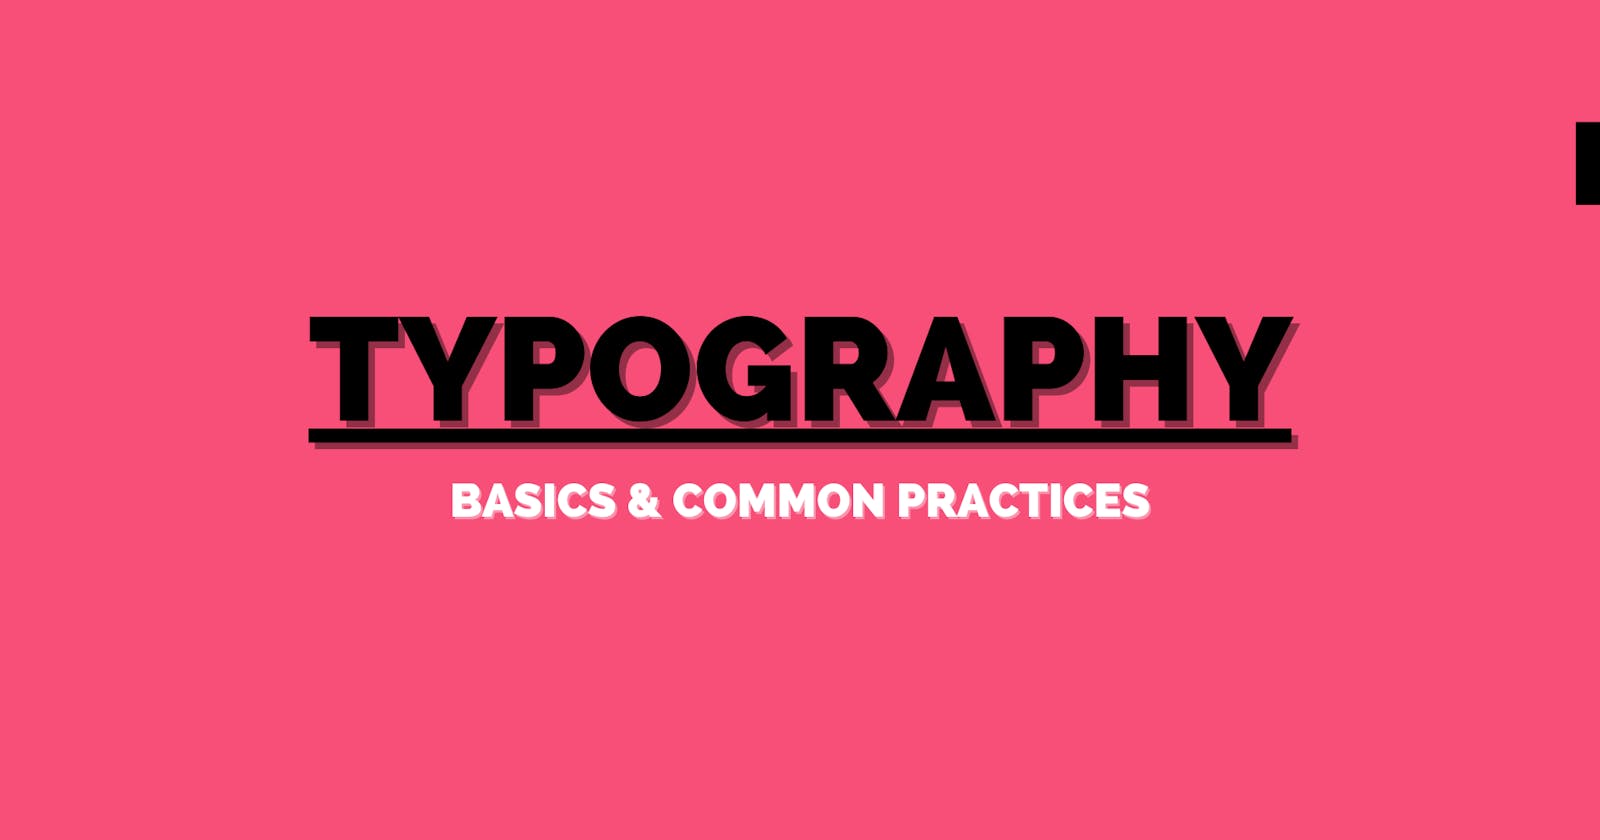 Typography basics and best practices for software developers